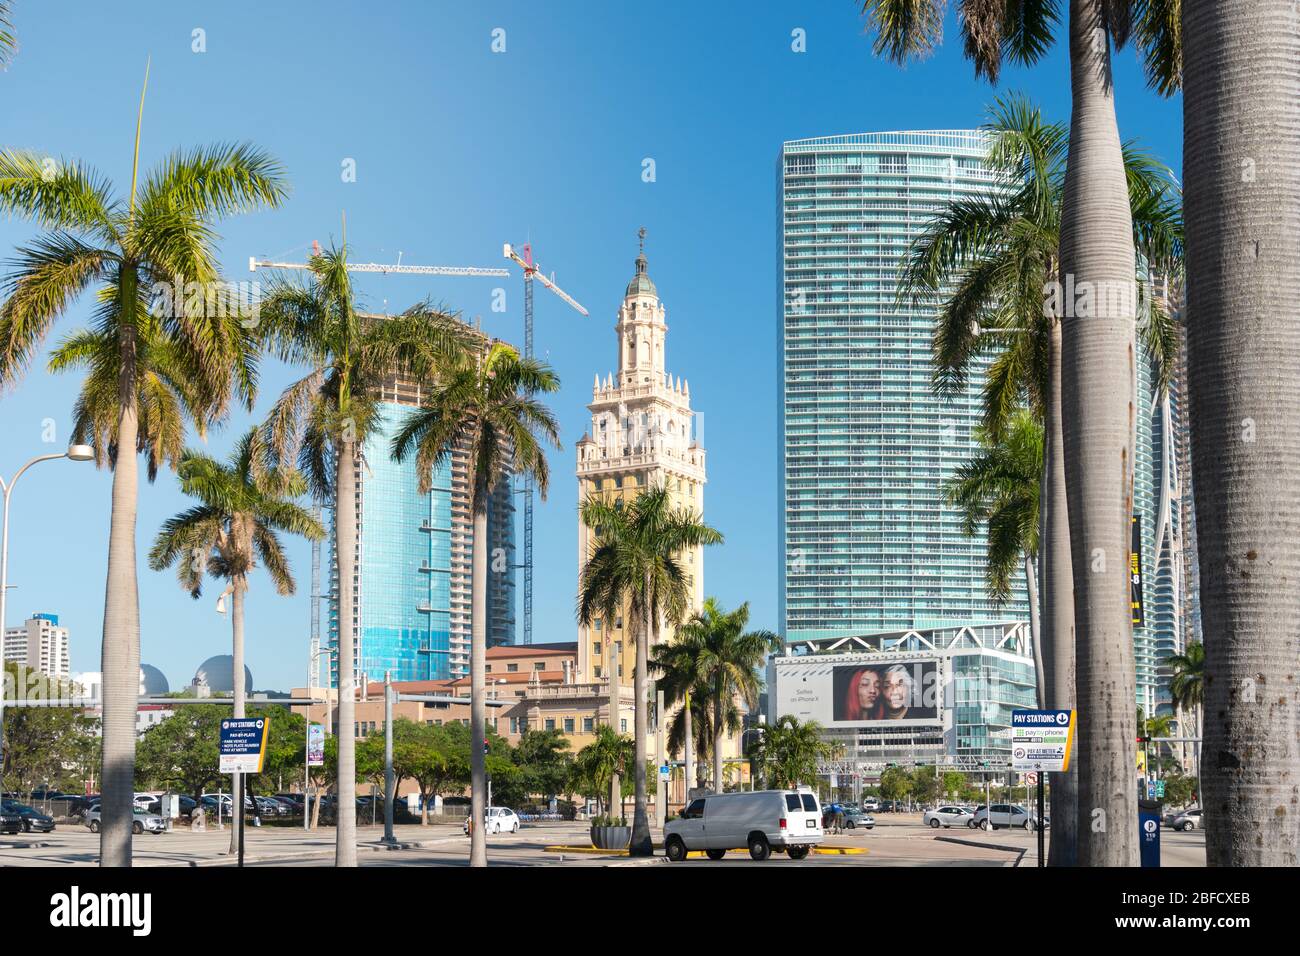 Miami,USA-march 16,2018:view of the freedom tower between the skyscrapers in downtown Miami on the Biscayne Boulevard during a sunny day. Stock Photo